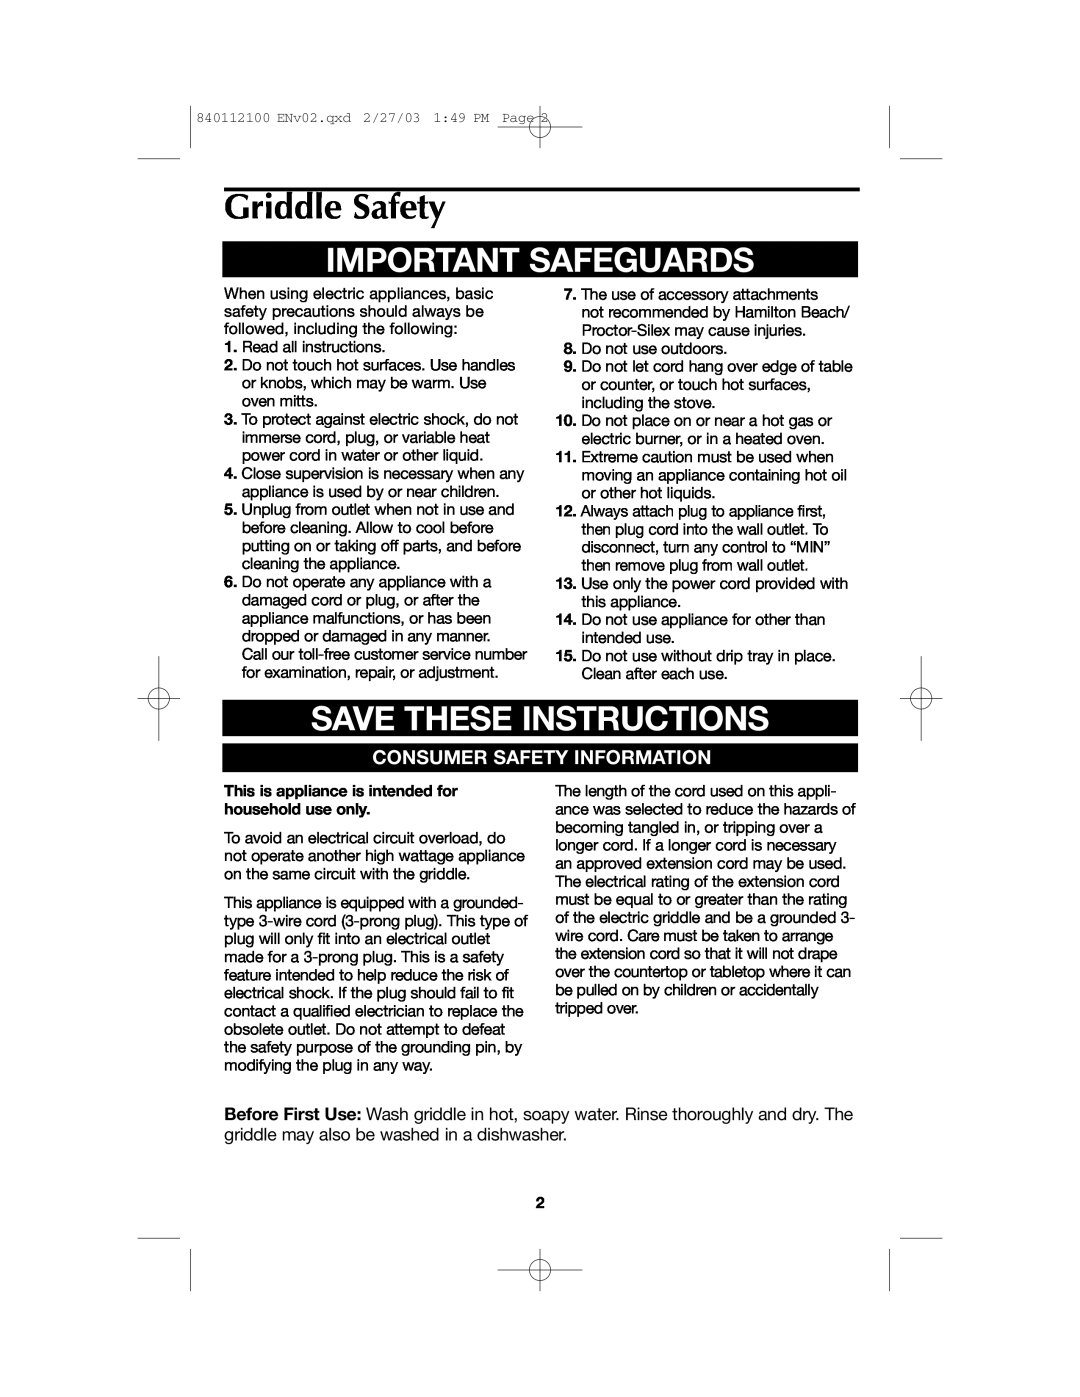 Proctor-Silex 840112100 manual Griddle Safety, Important Safeguards, Save These Instructions, Consumer Safety Information 